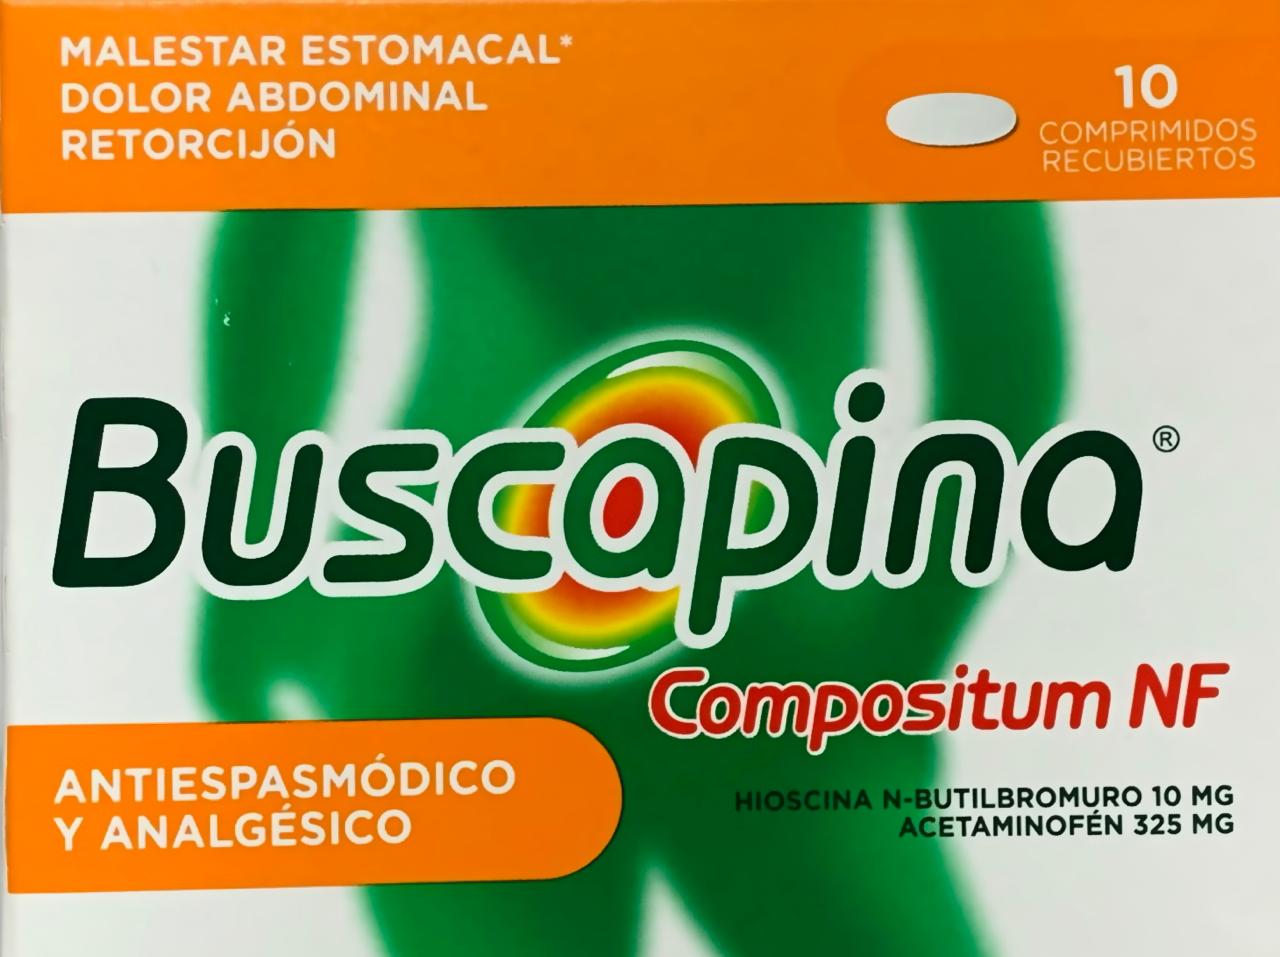 BUSCAPINA NF COMPOSITUM 10 TABLETAS